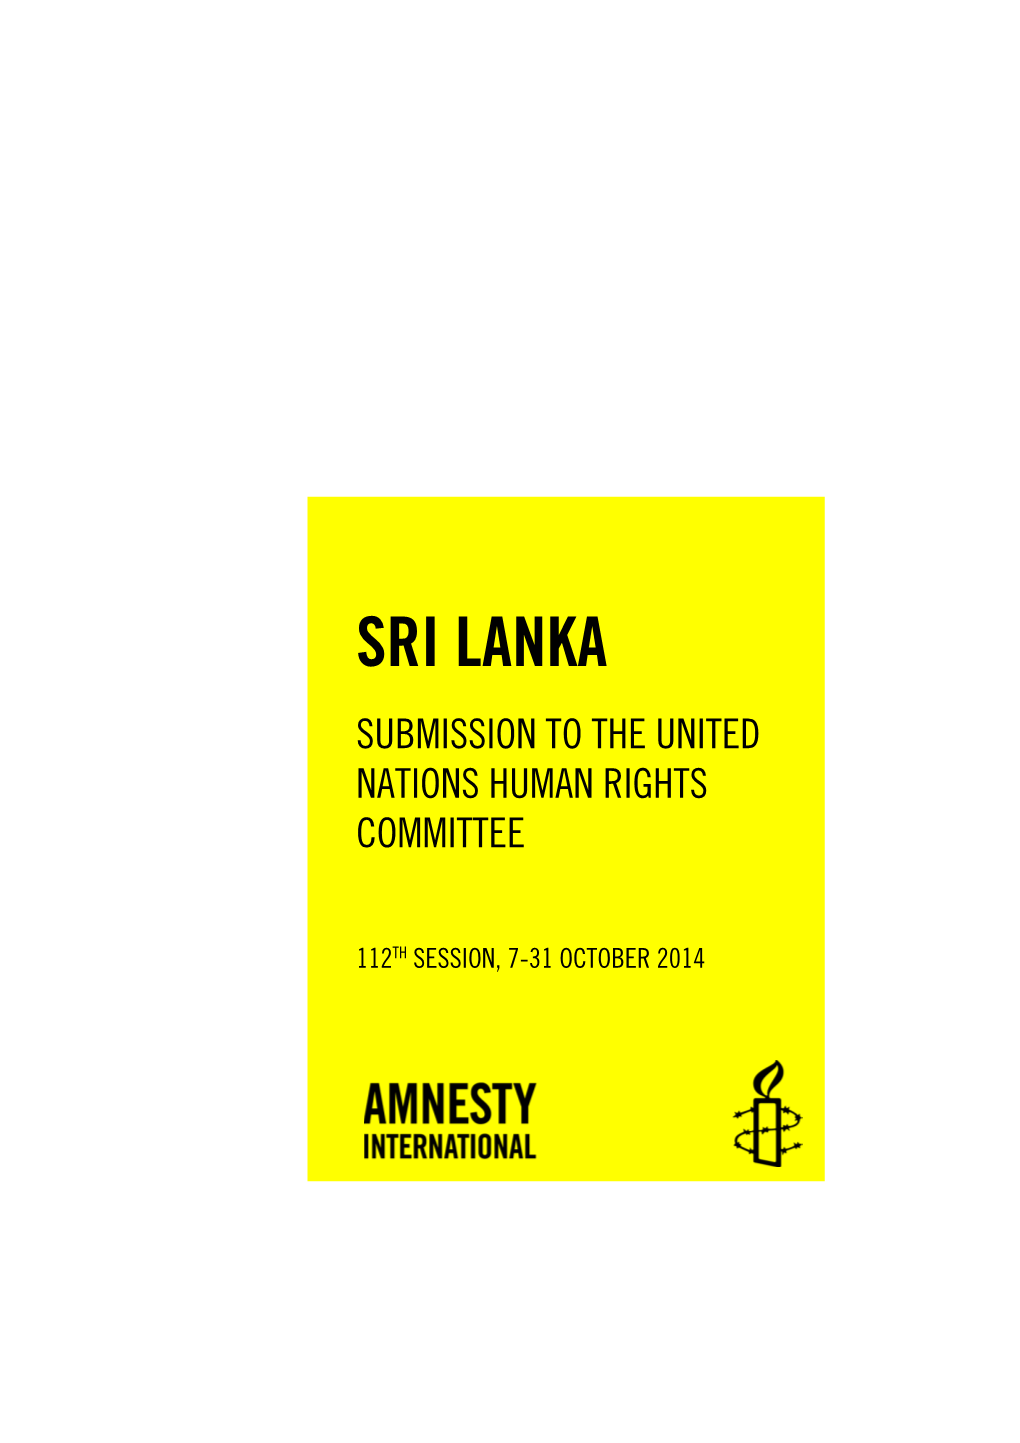 Sri Lanka Submission to the United Nations Human Rights Committee